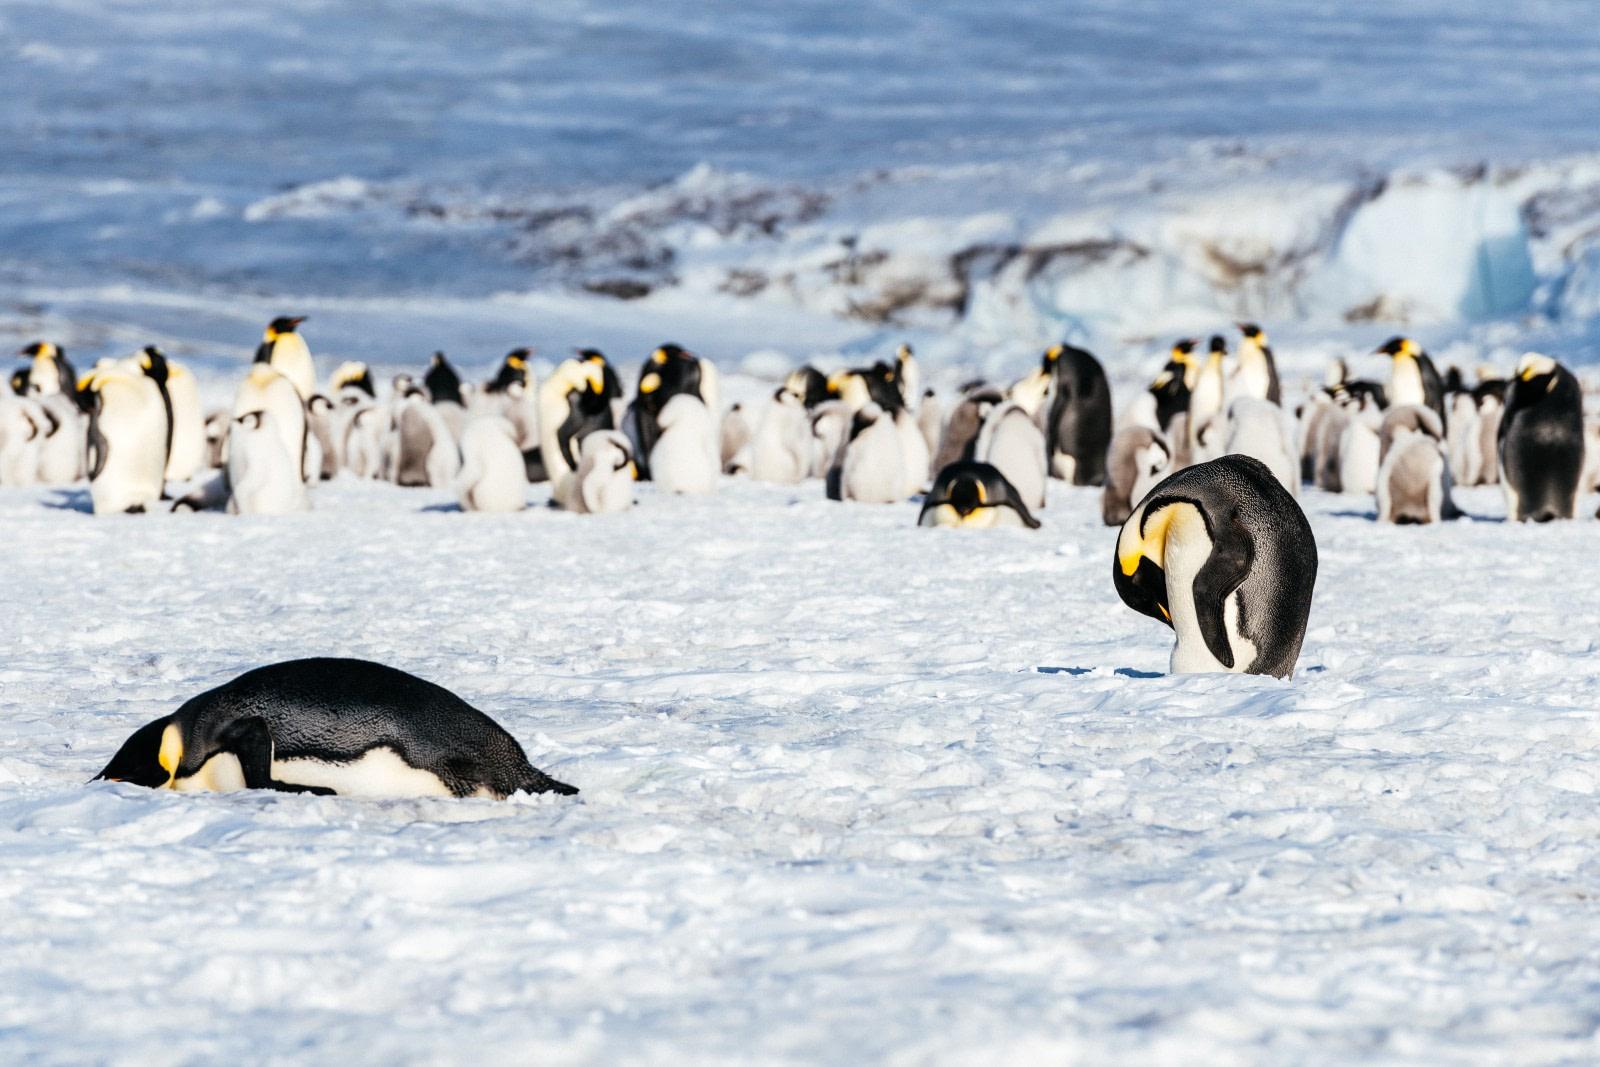 Weddell Sea - In search of the Emperor Penguin, incl. helicopters